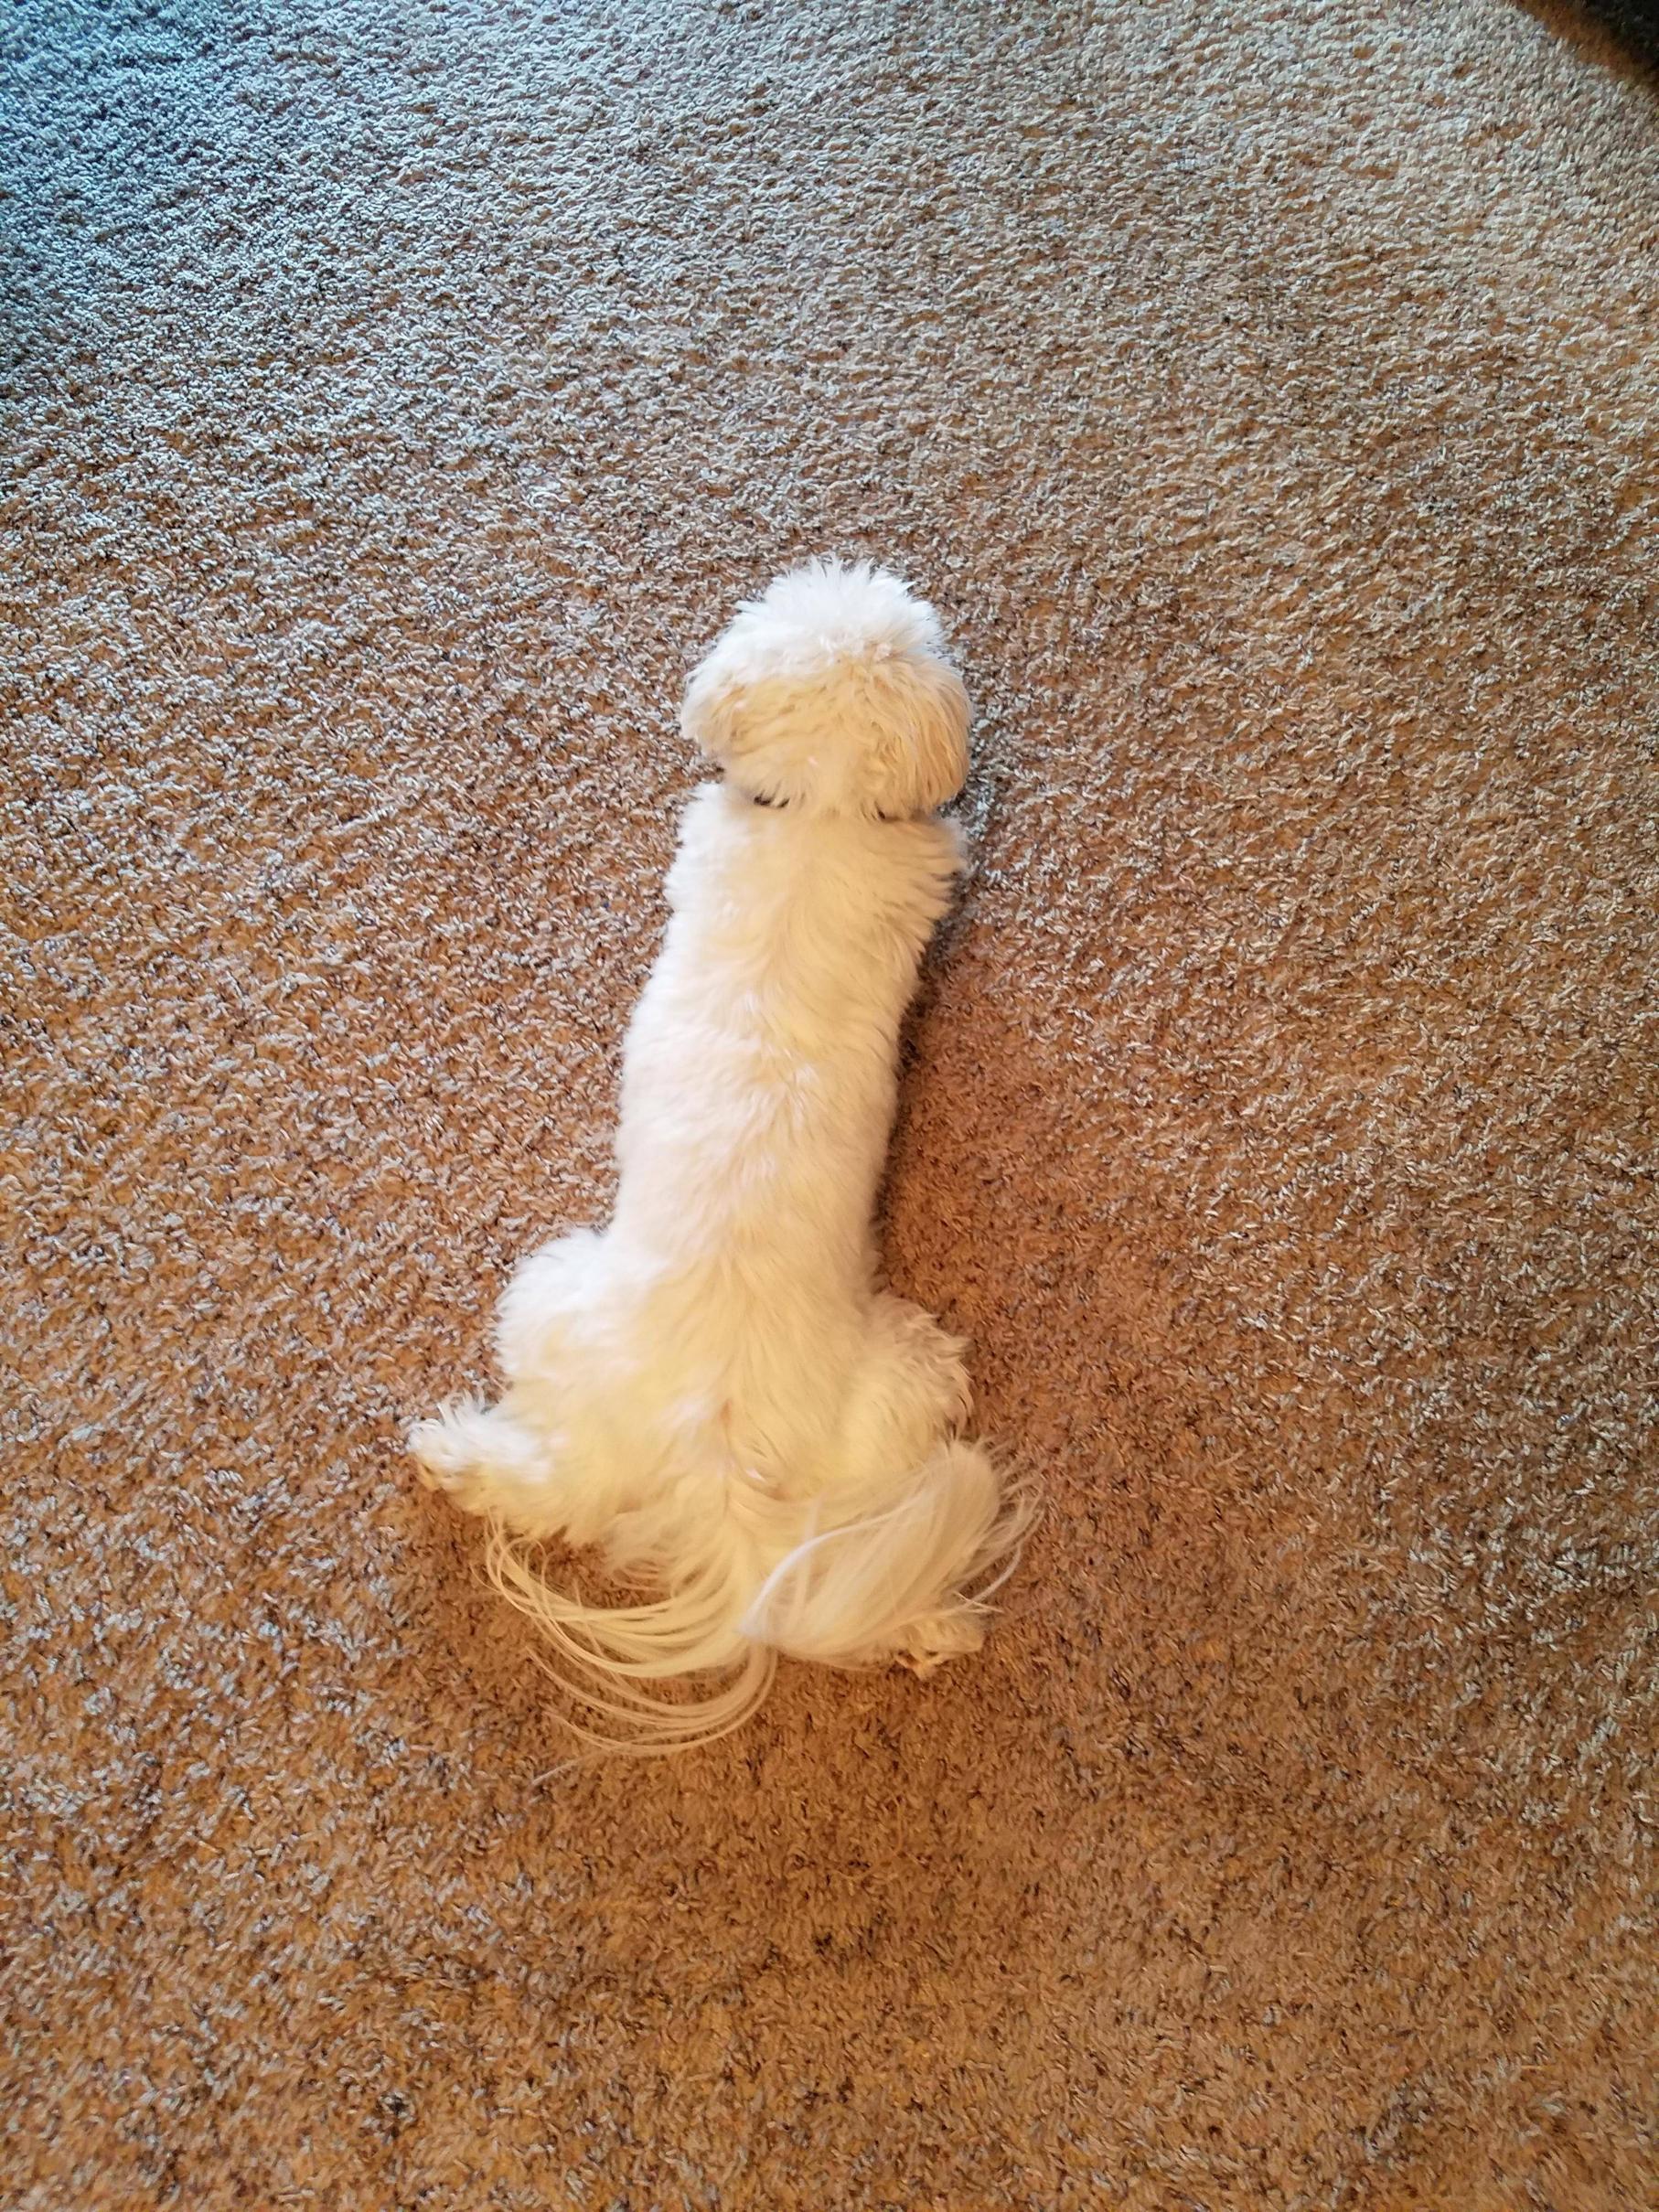 Sometimes my dog can be kind of a dick